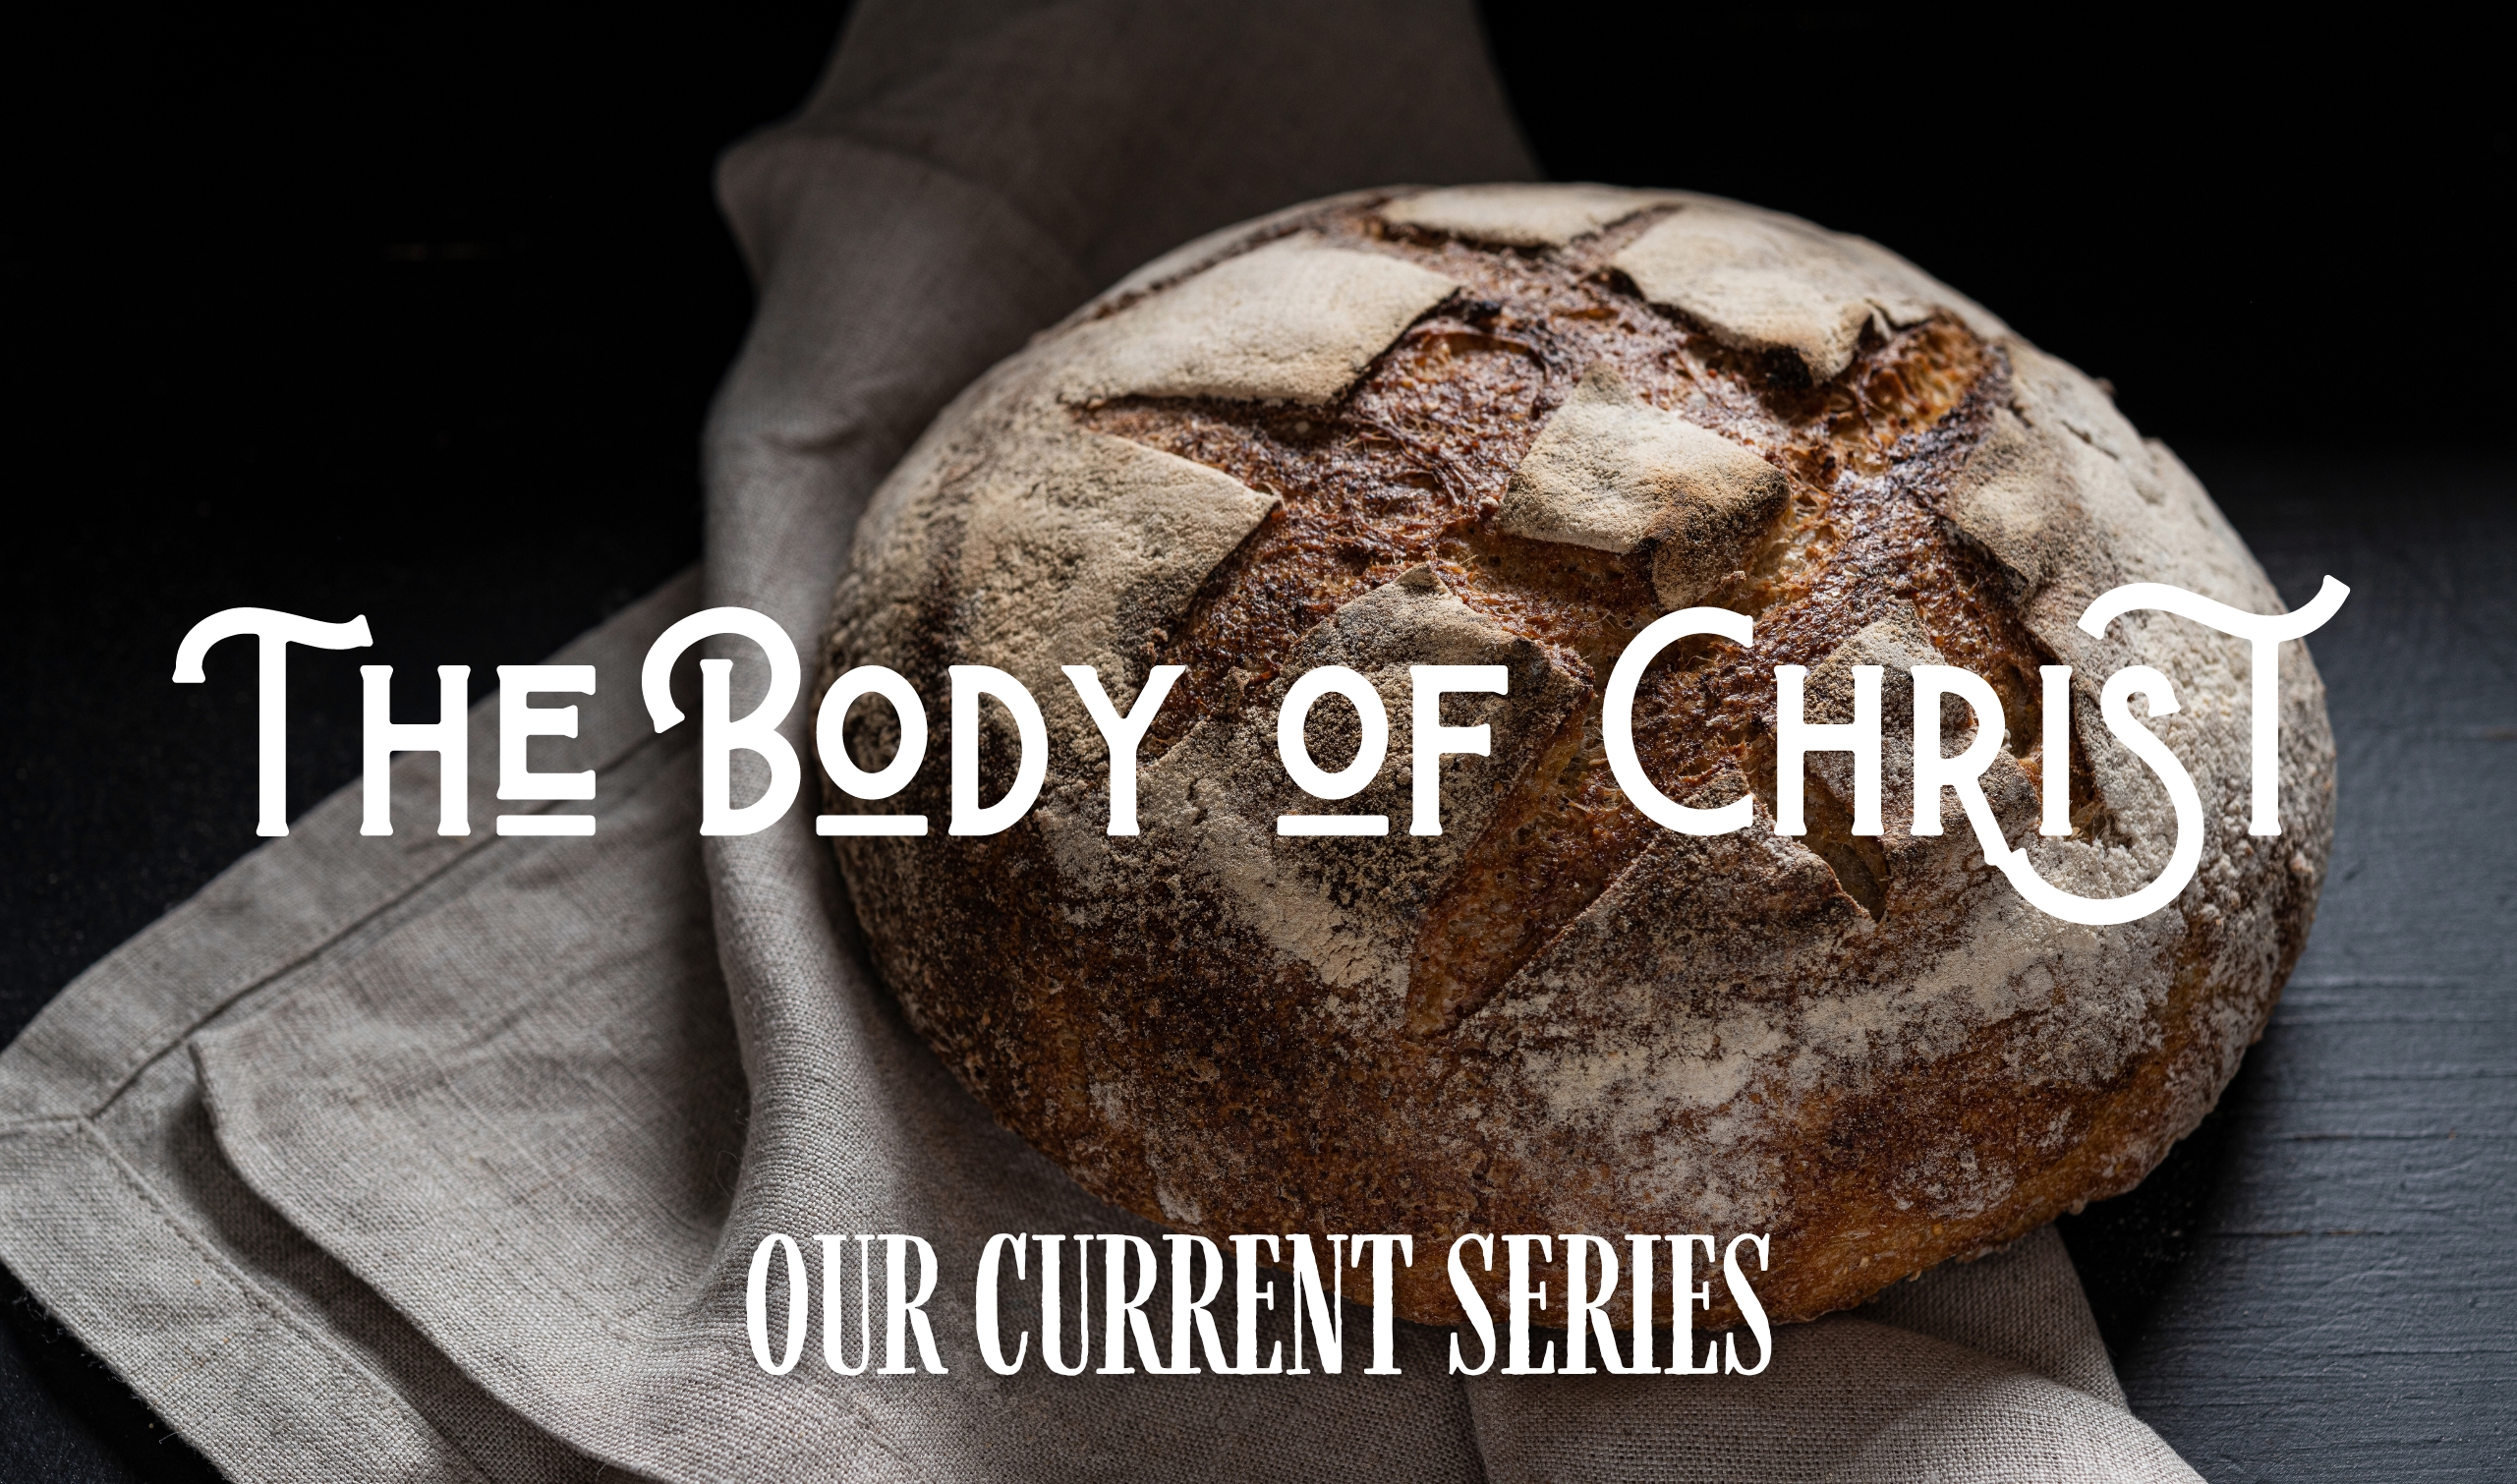 Our Current Series: The Body of Christ